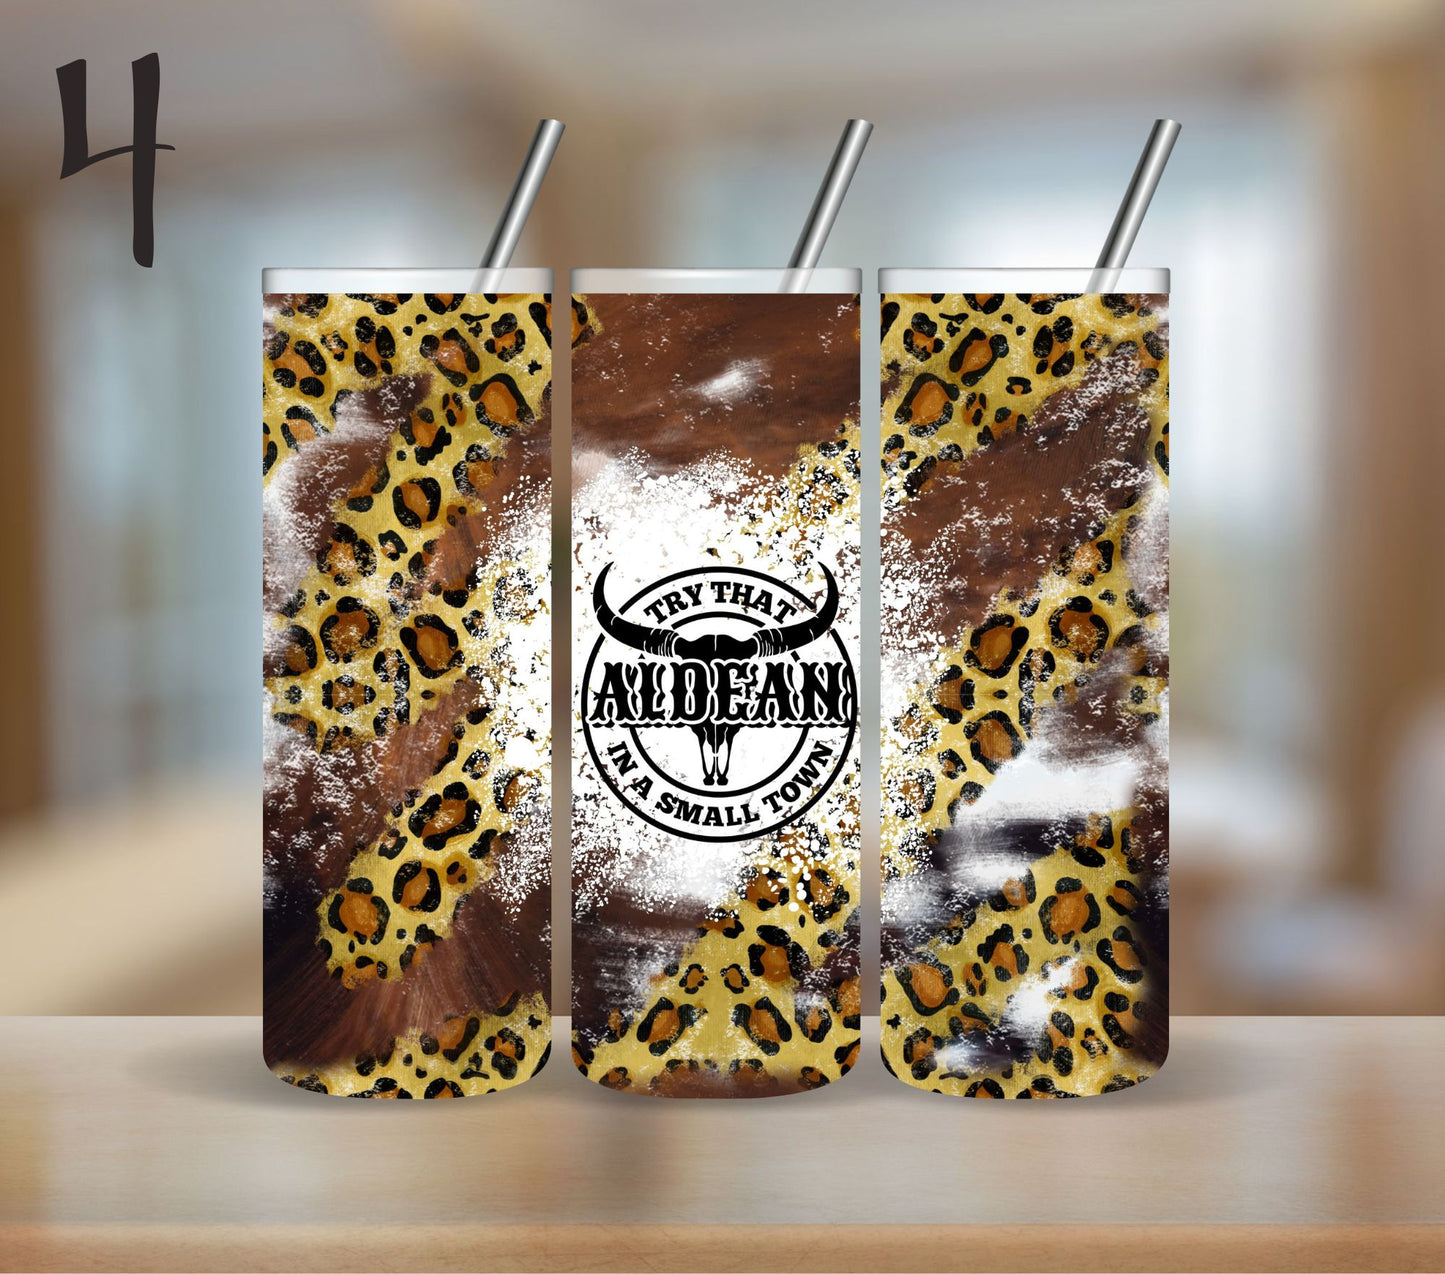 Try that in a small town wrap DIgital download- not a physical product 6 designs